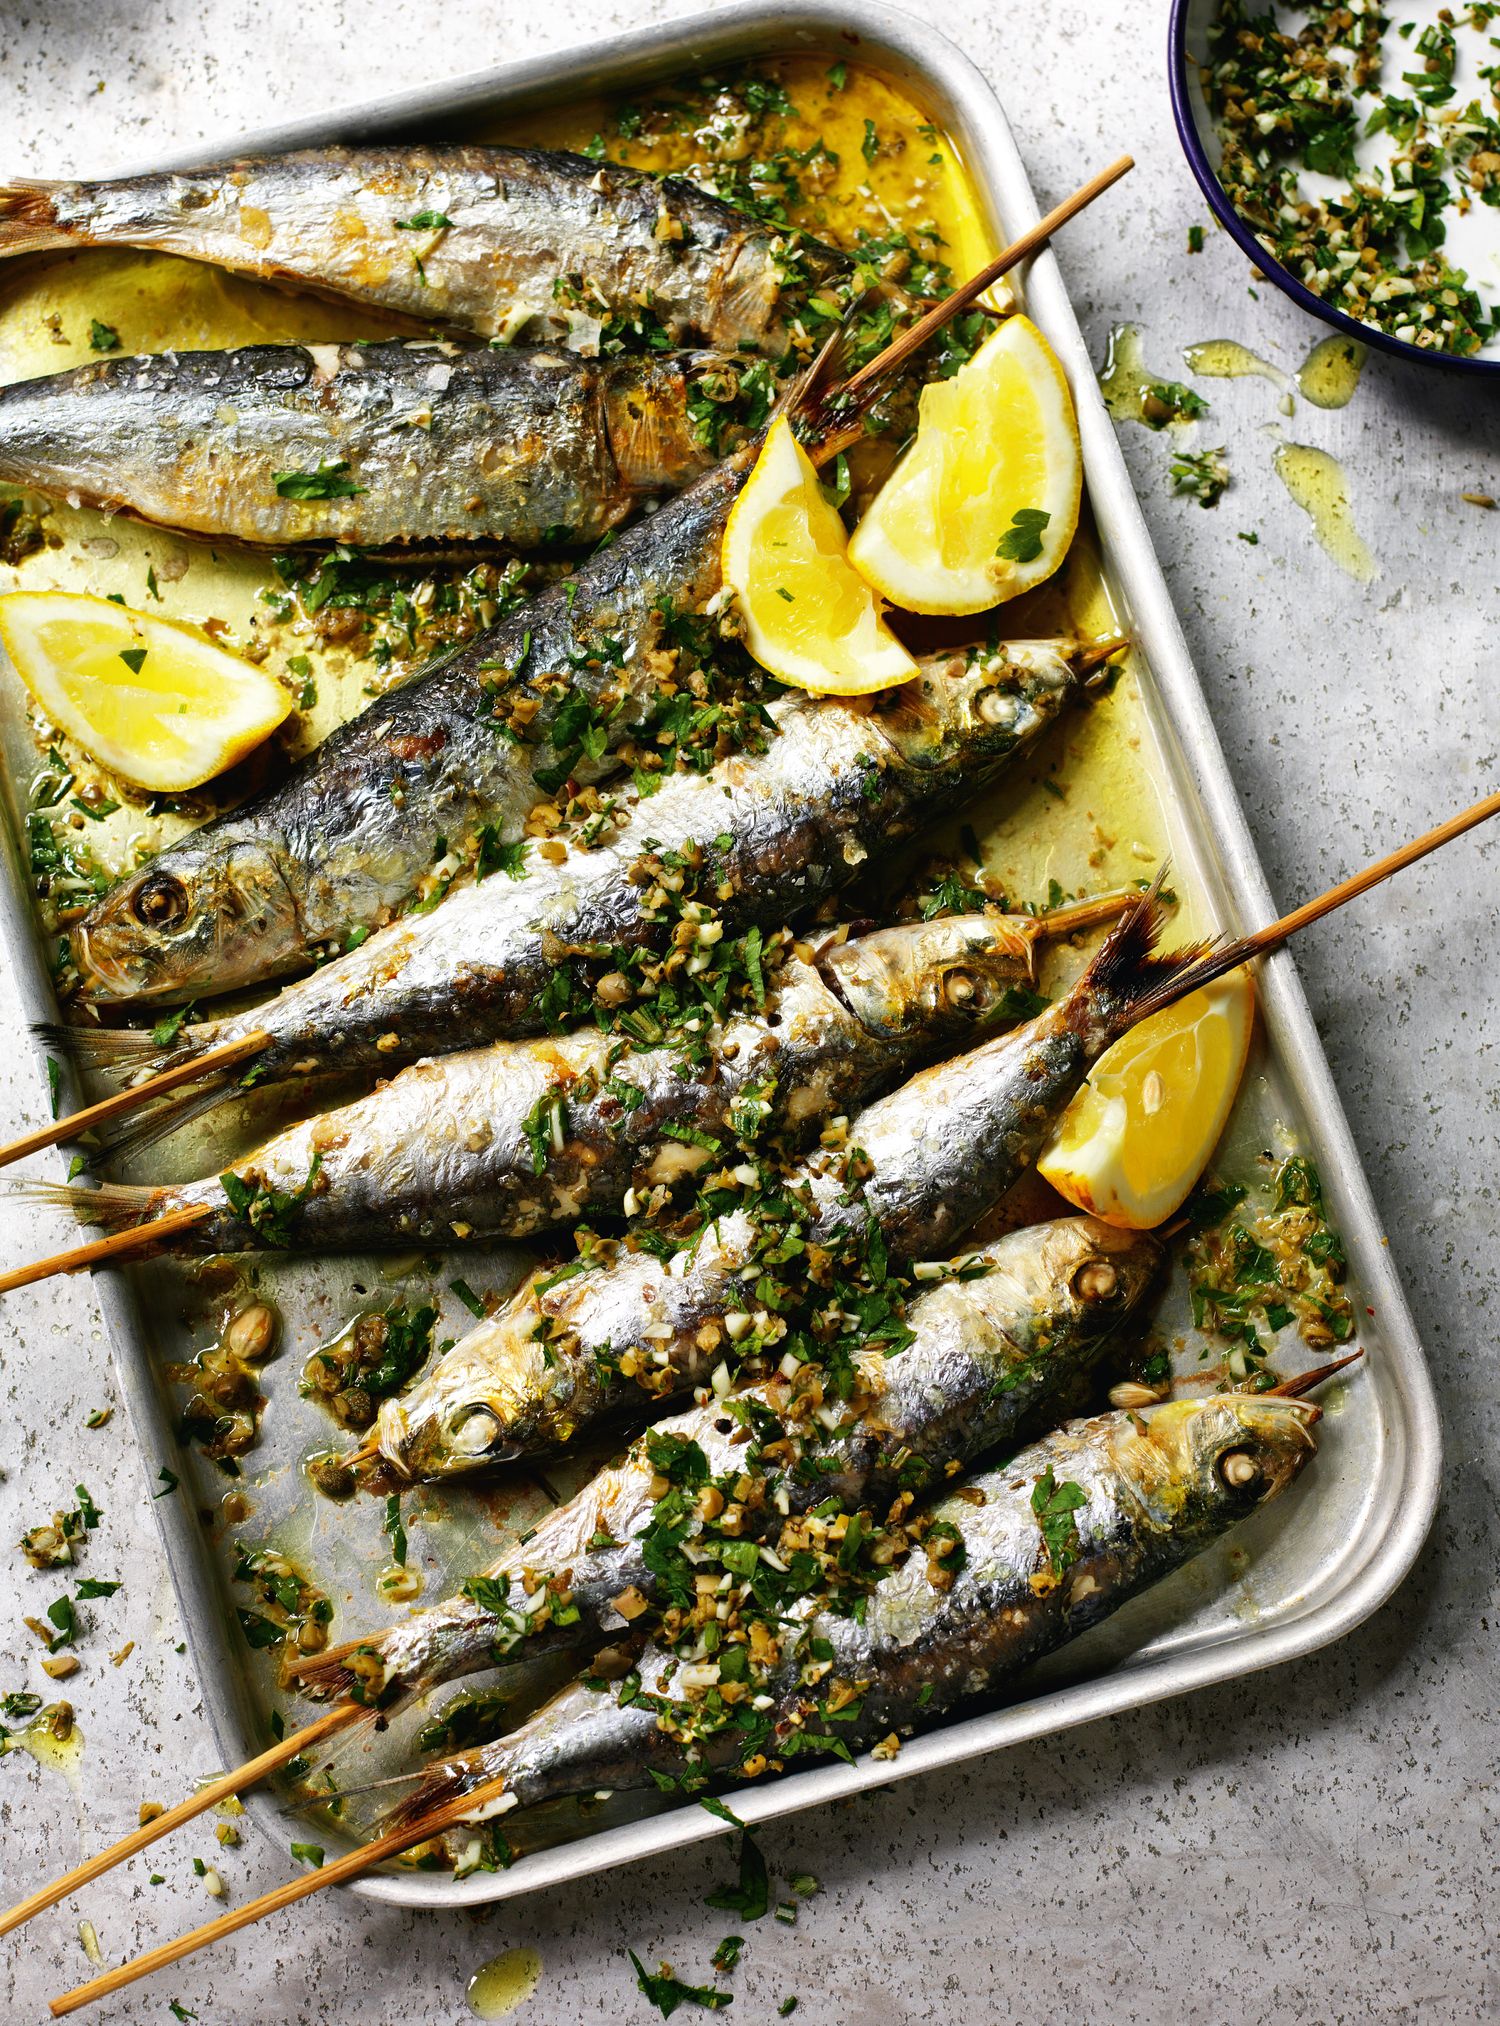 Grilled sardines with coarsely chopped green herbs - The Happy Foodie